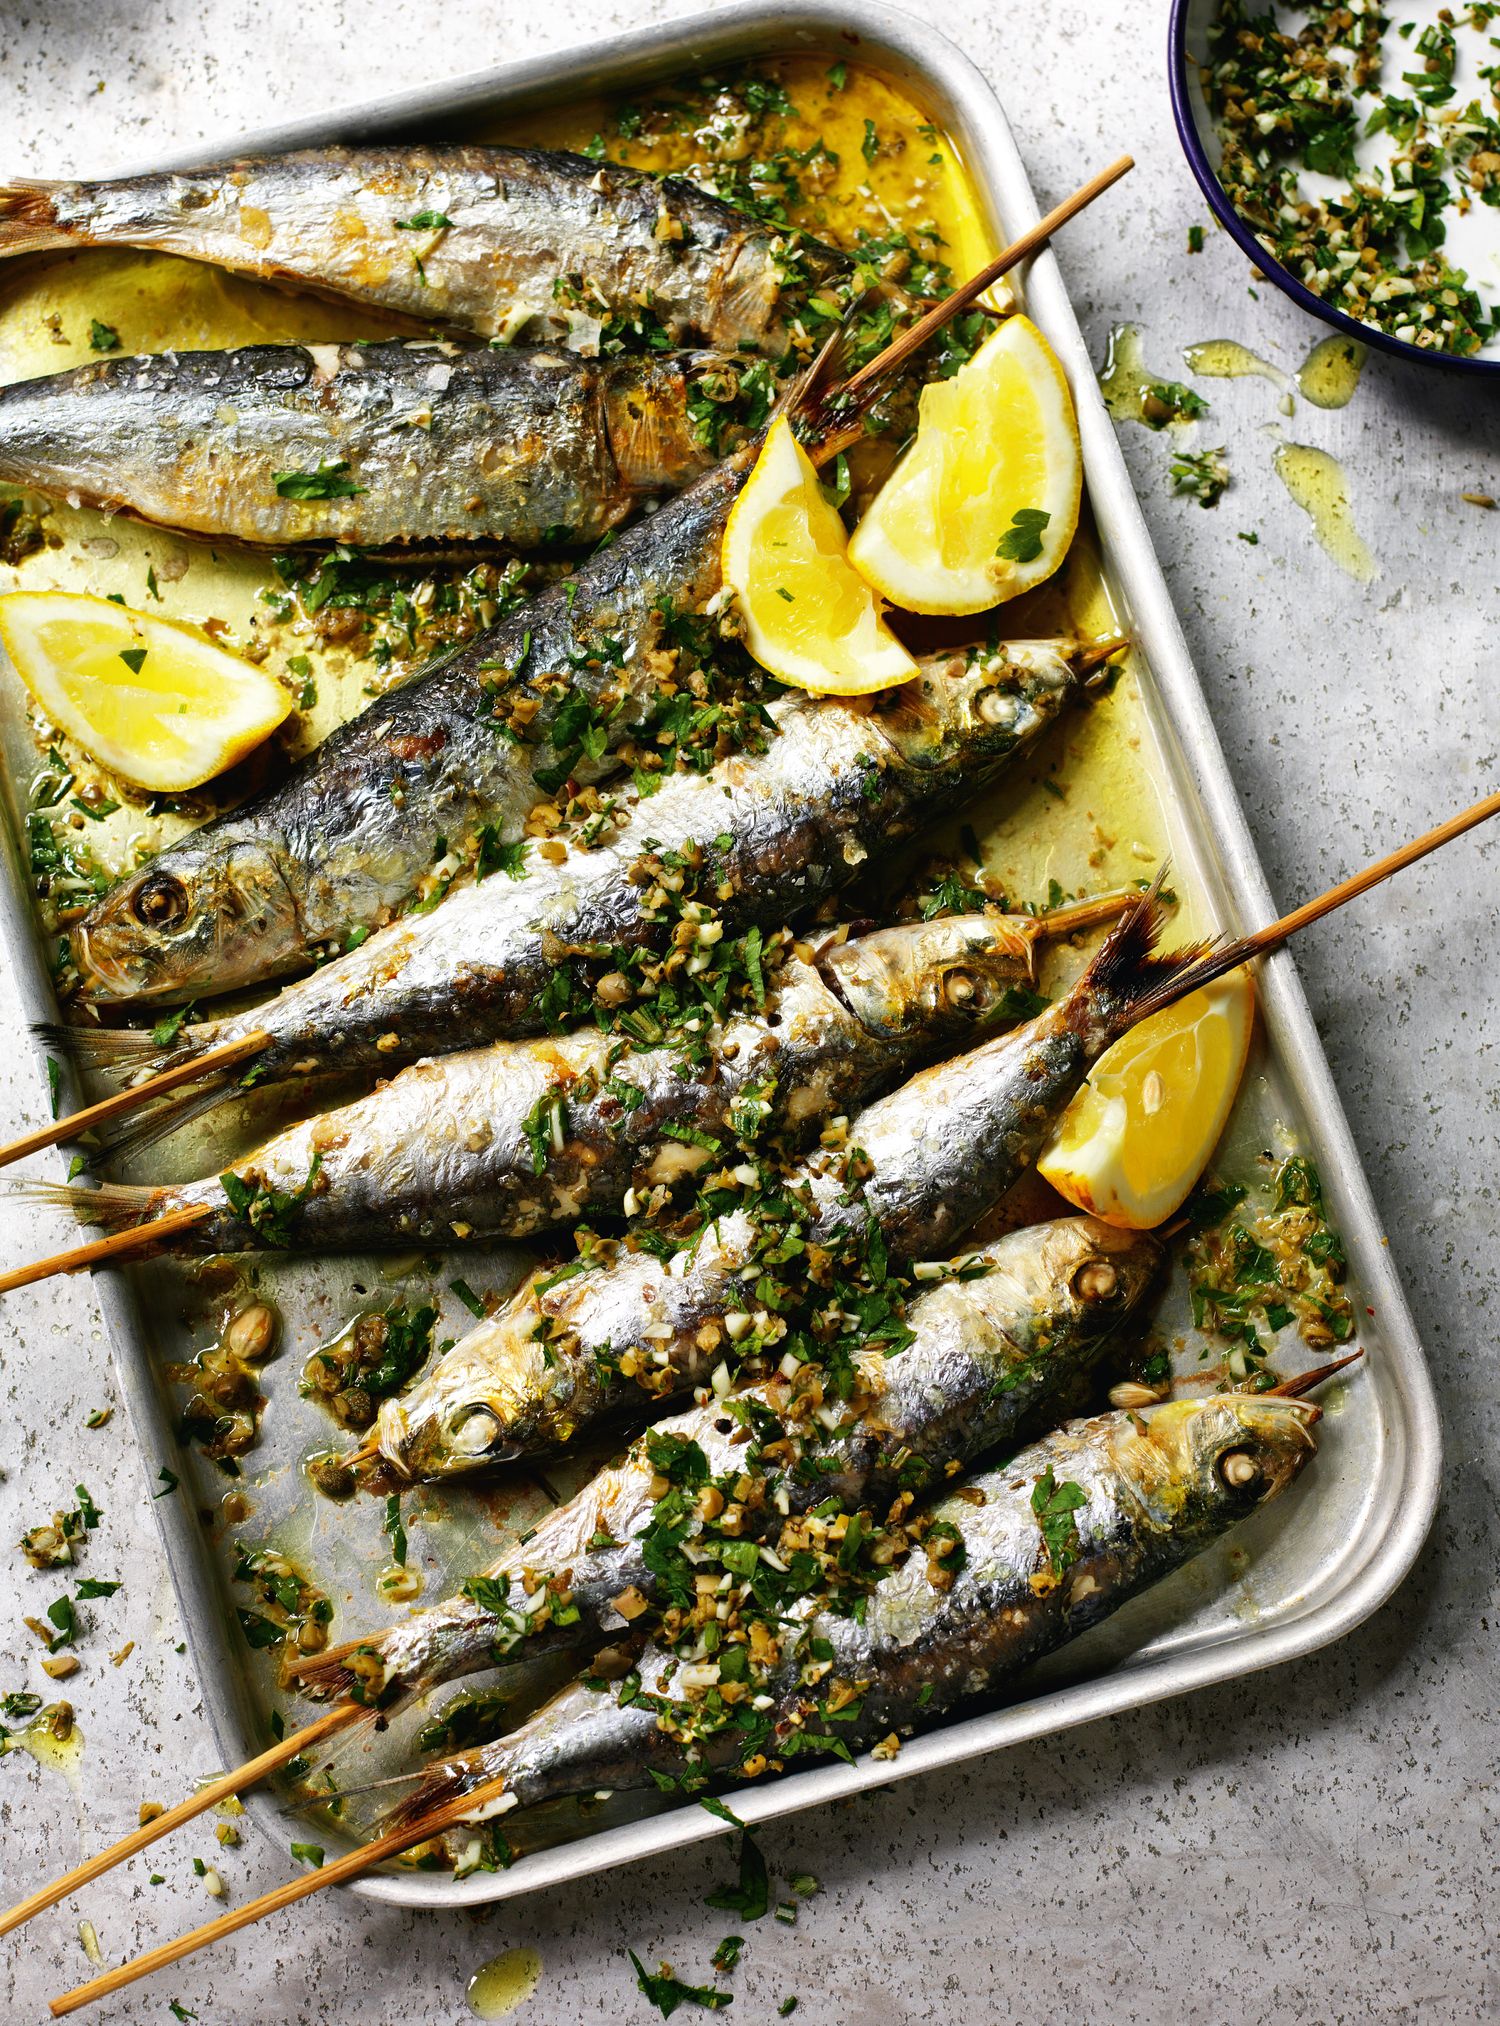 Grilled sardines with coarsely chopped green herbs - The Happy Foodie